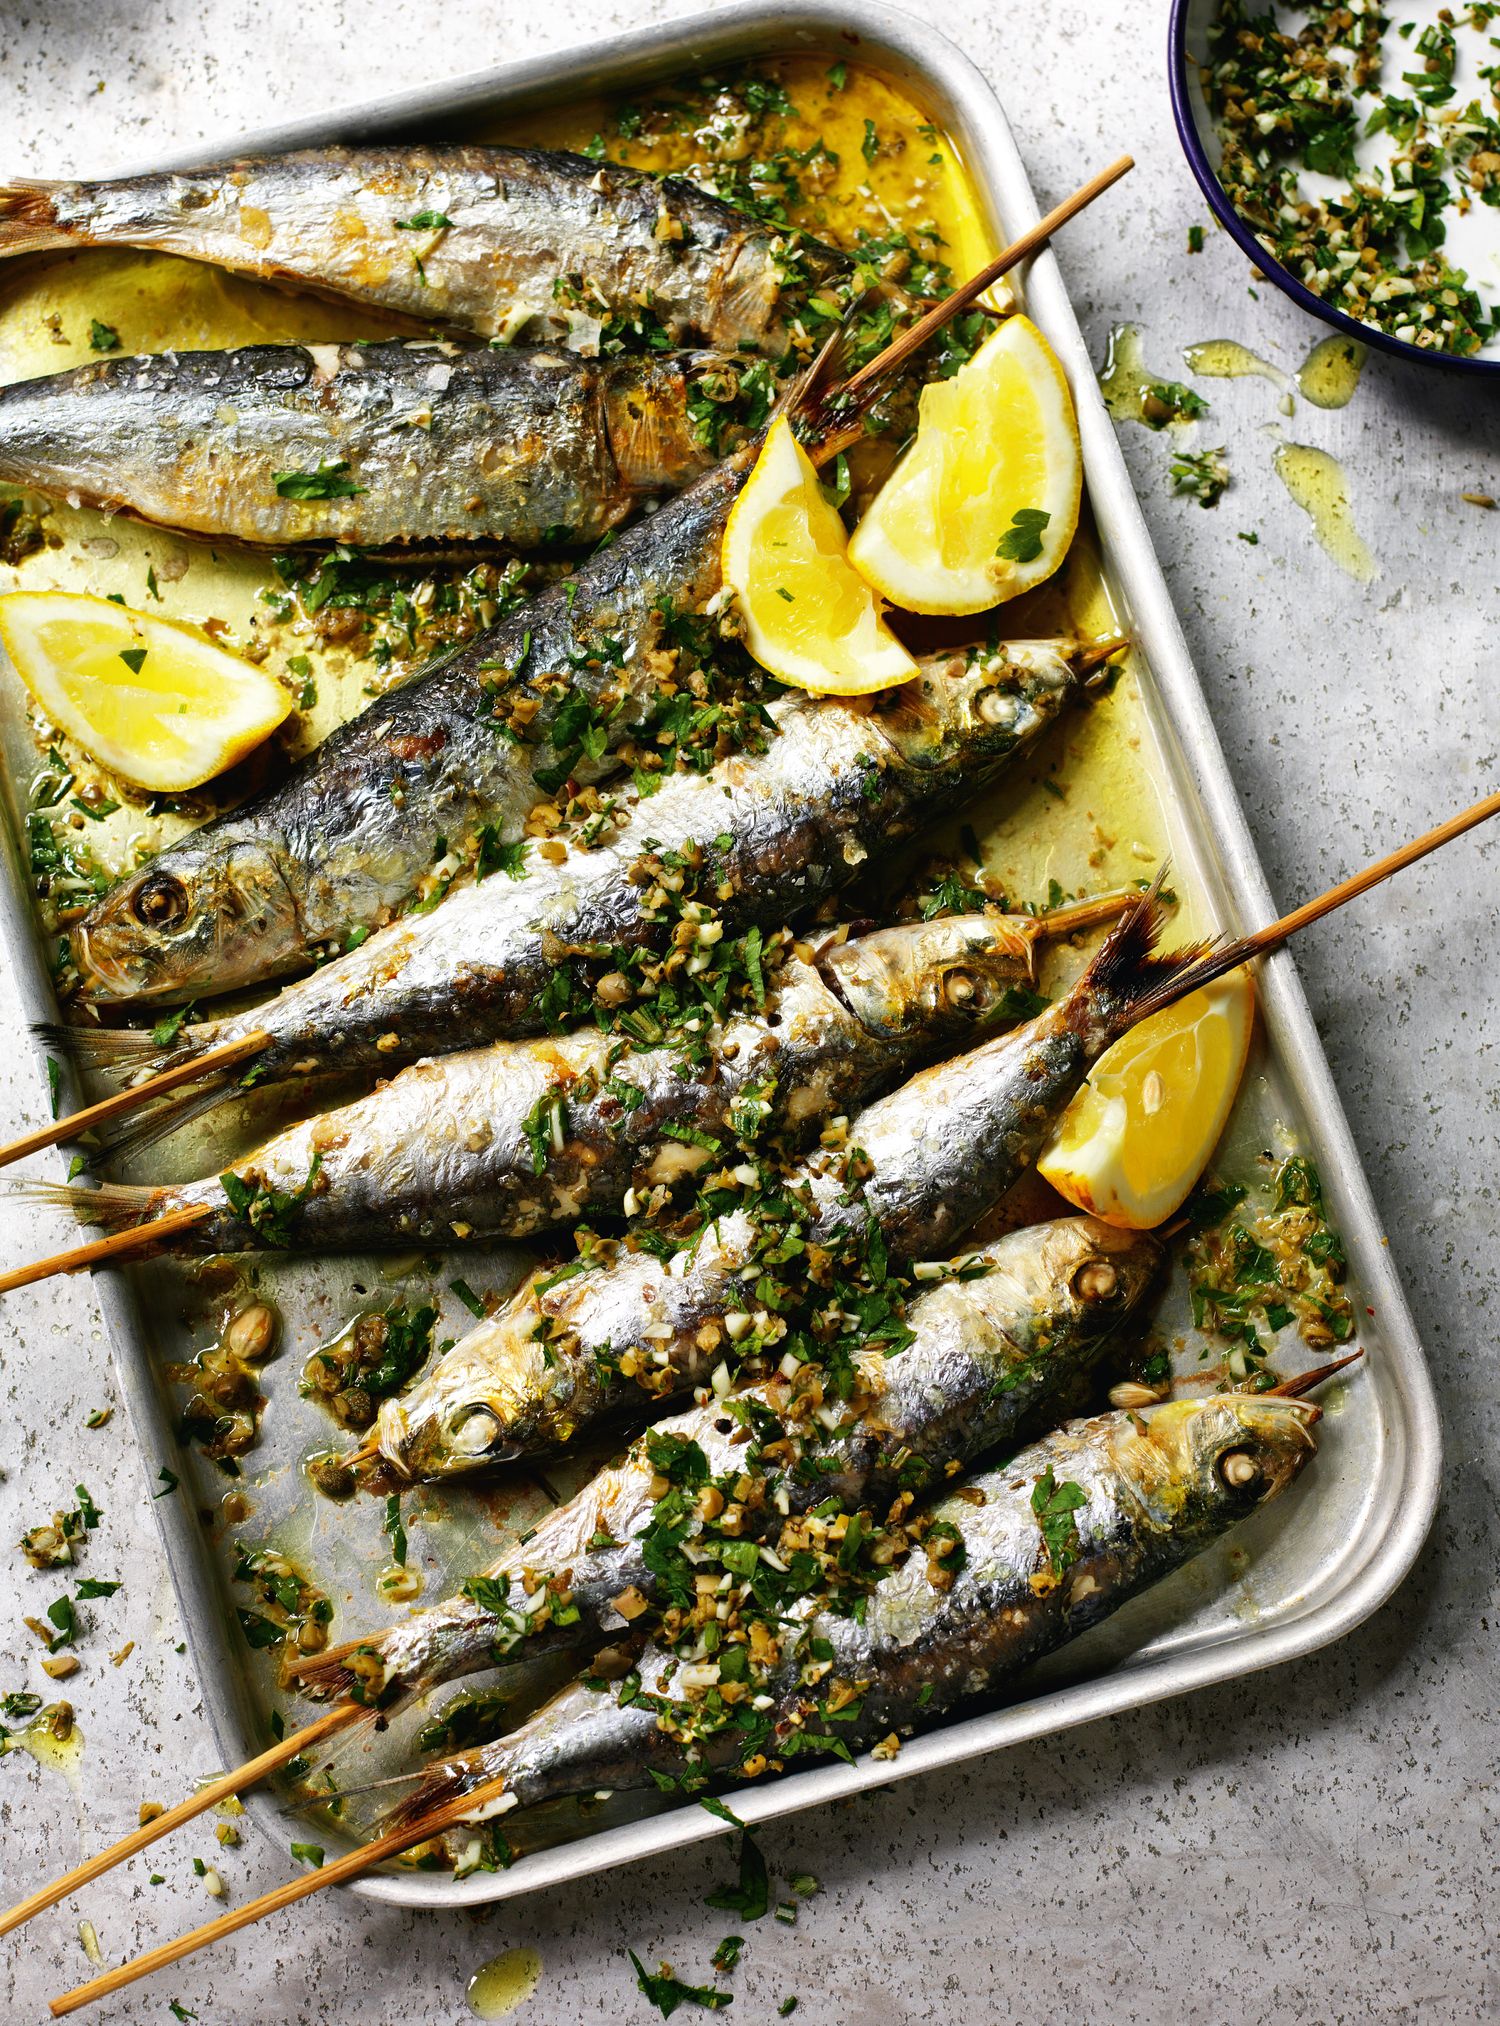 Grilled sardines with coarsely chopped green herbs - The Happy Foodie